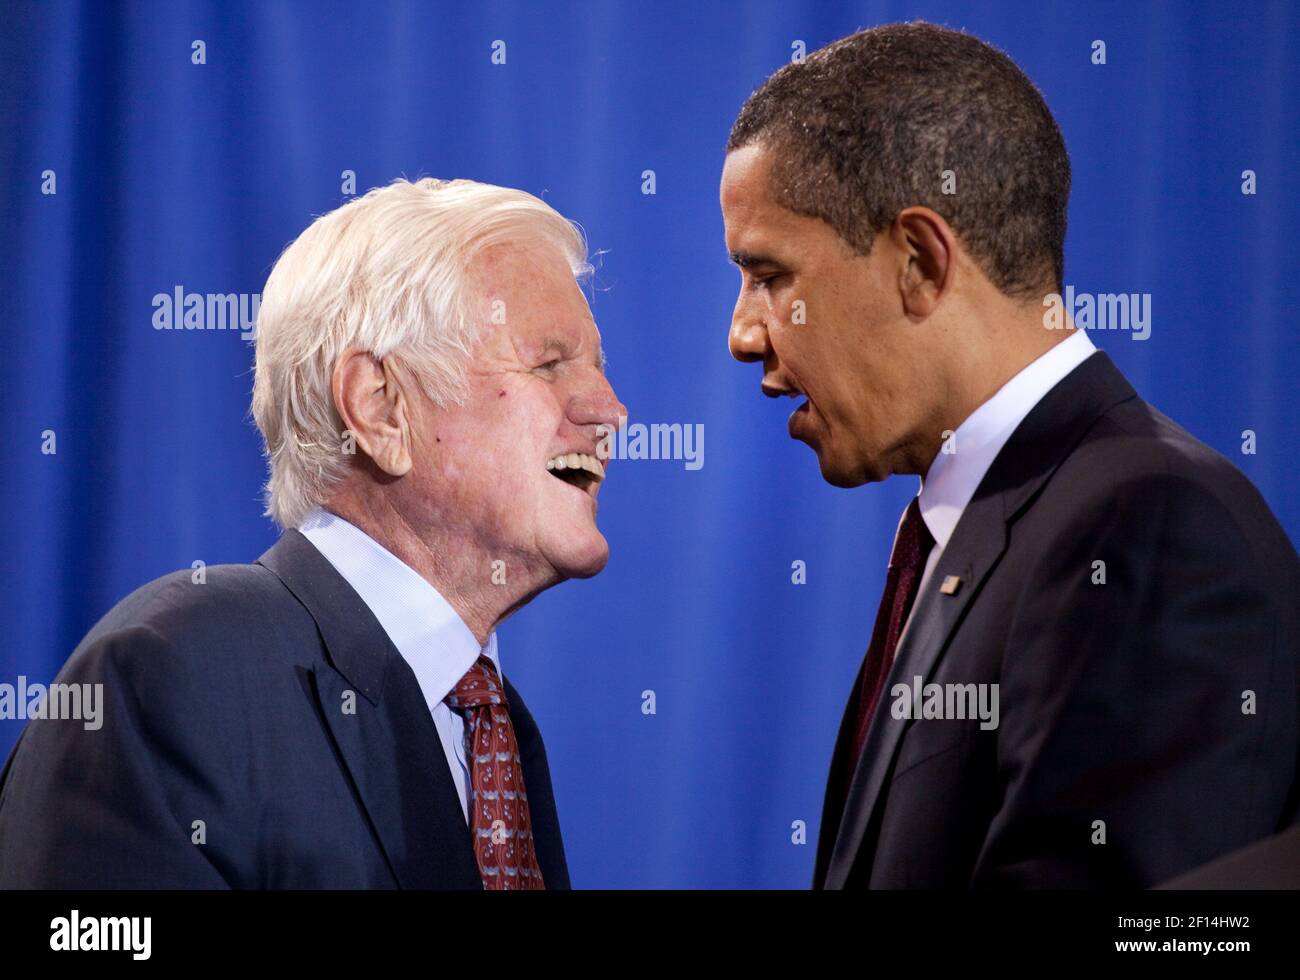 President Barack Obama and Senator Ted Kennedy participate in a national service event at The SEED School of Washington, D.C., where H.R. 1388, the Edward M. Kennedy Serve America Act was signed April 21, 2009 Stock Photo